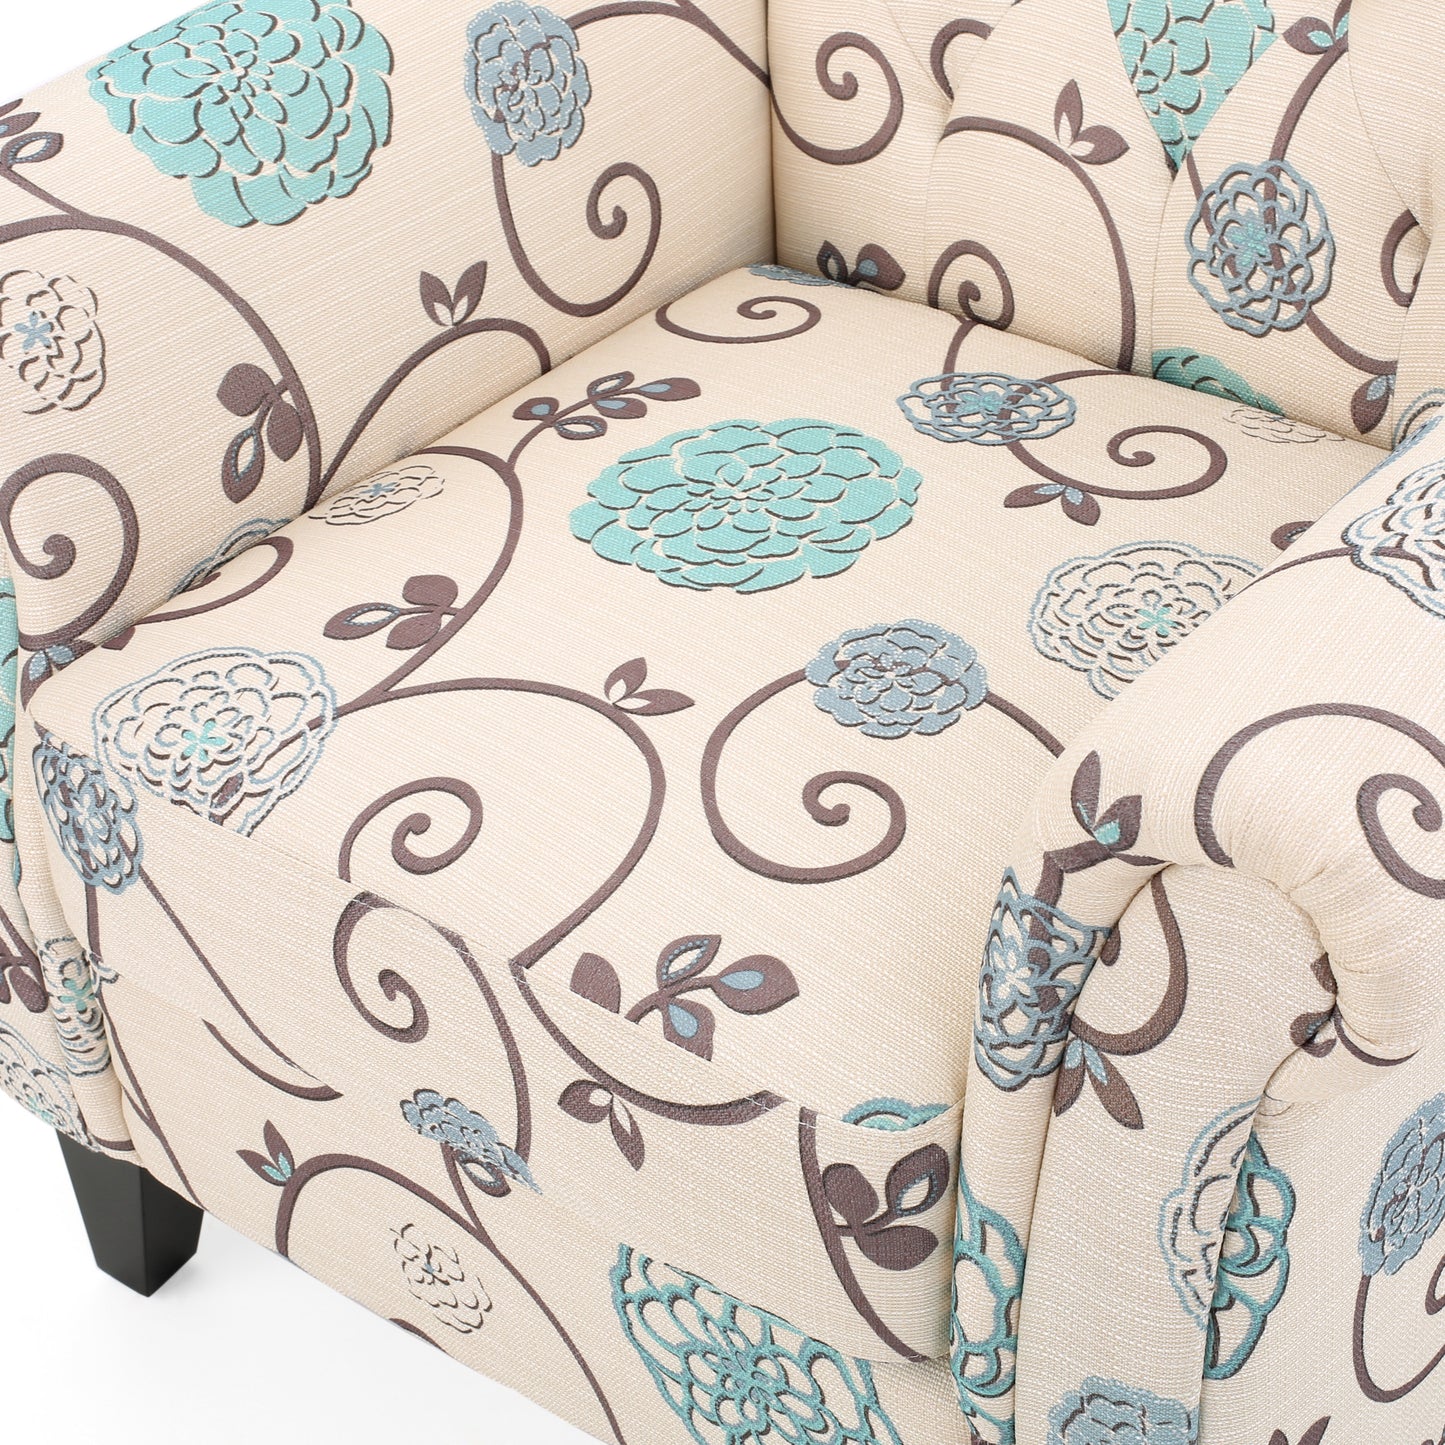 Solvang Floral Tufted Fabric Club Chair